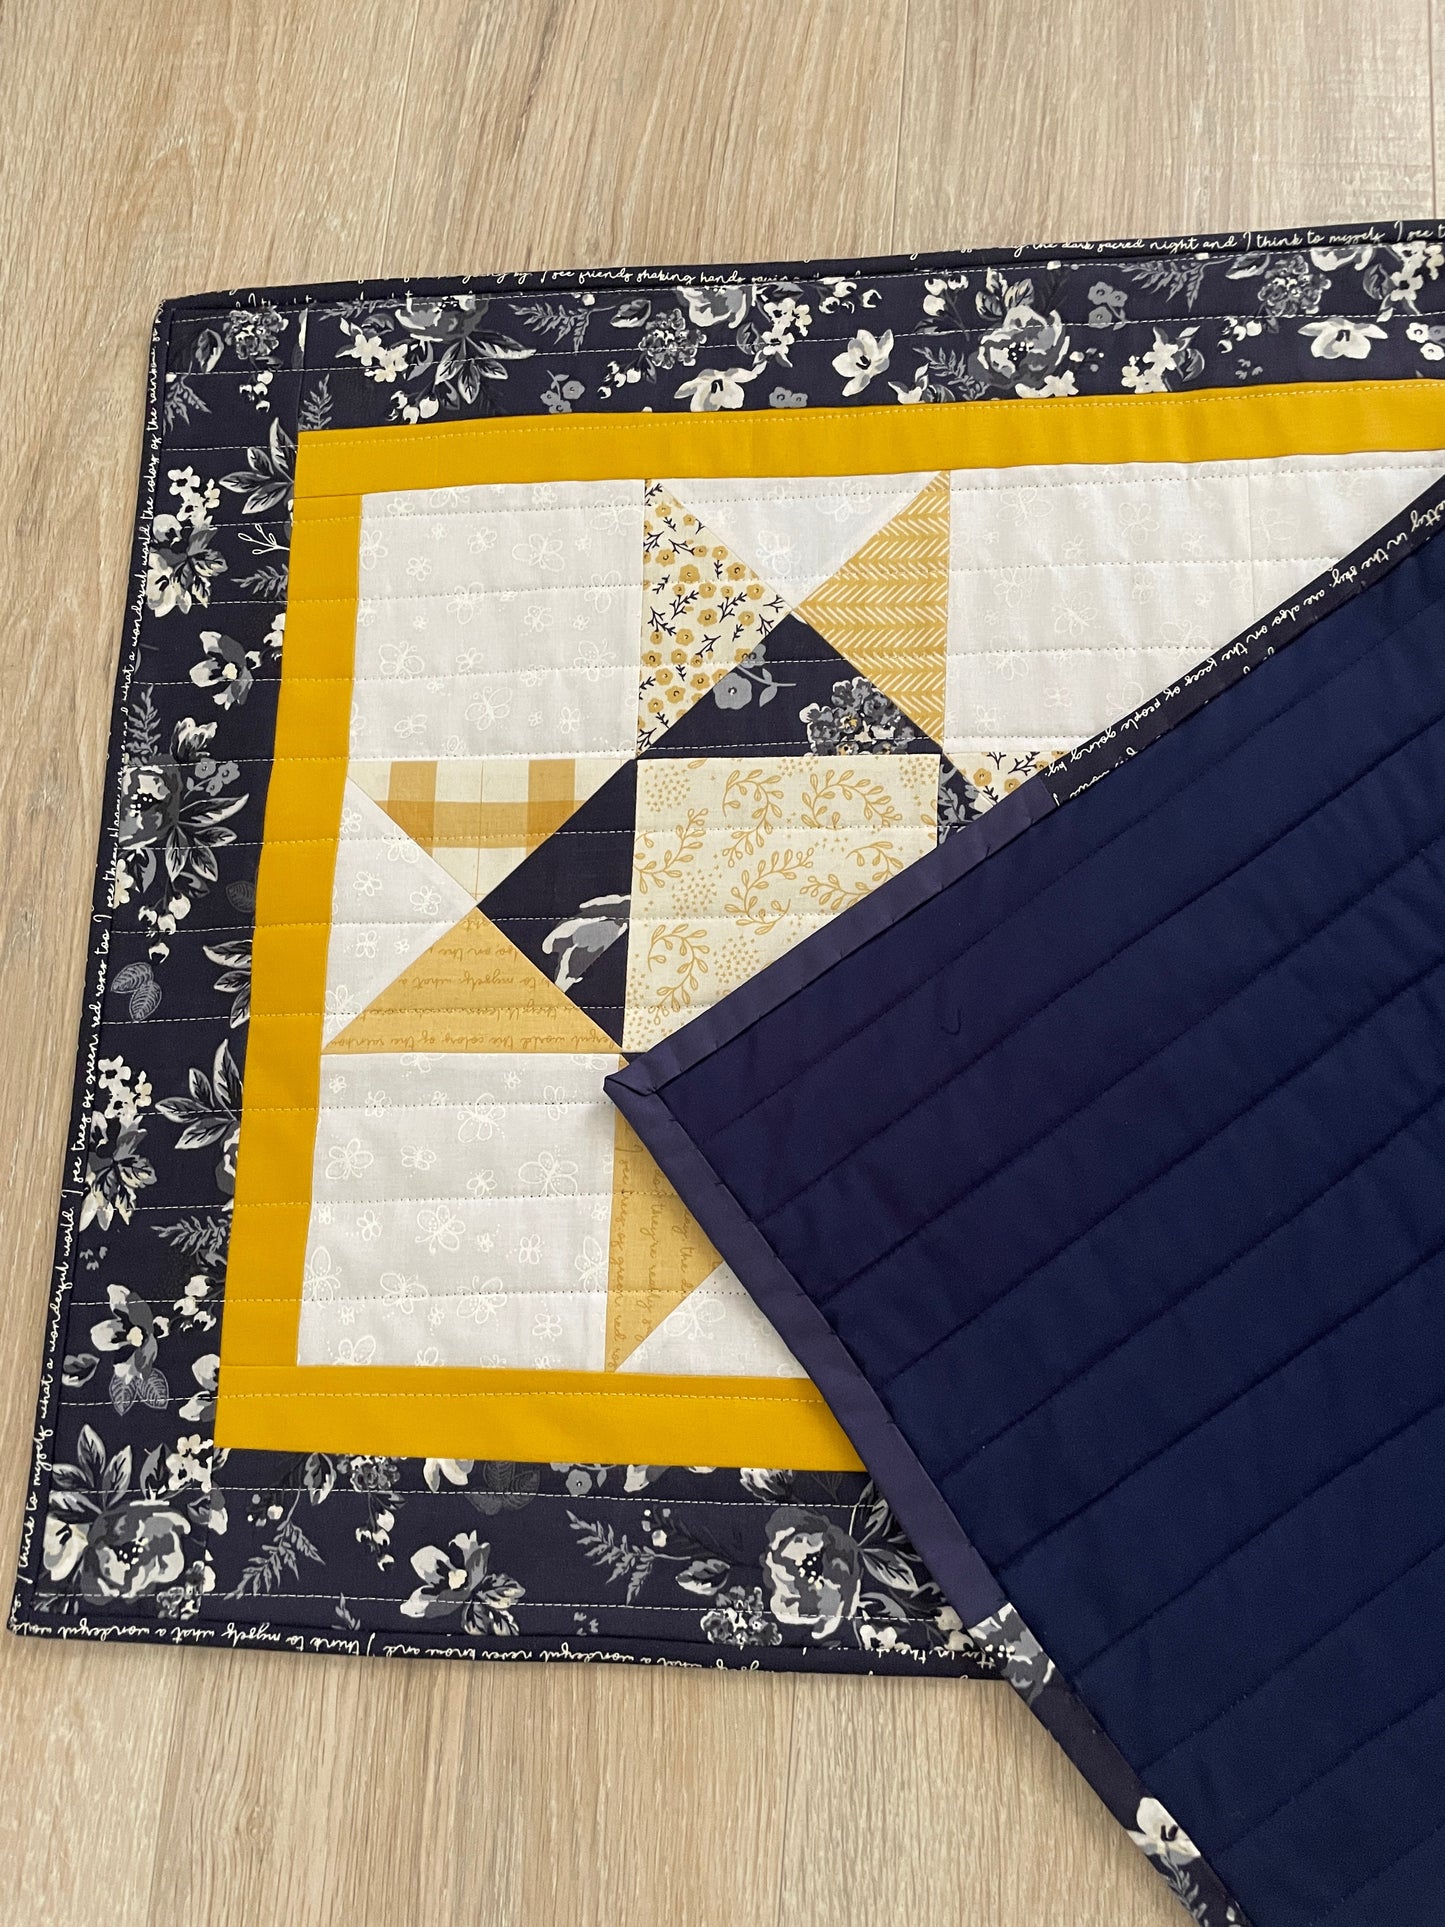 Handmade Quilted Table Runner in Blue, Yellow, White & Gray Colors